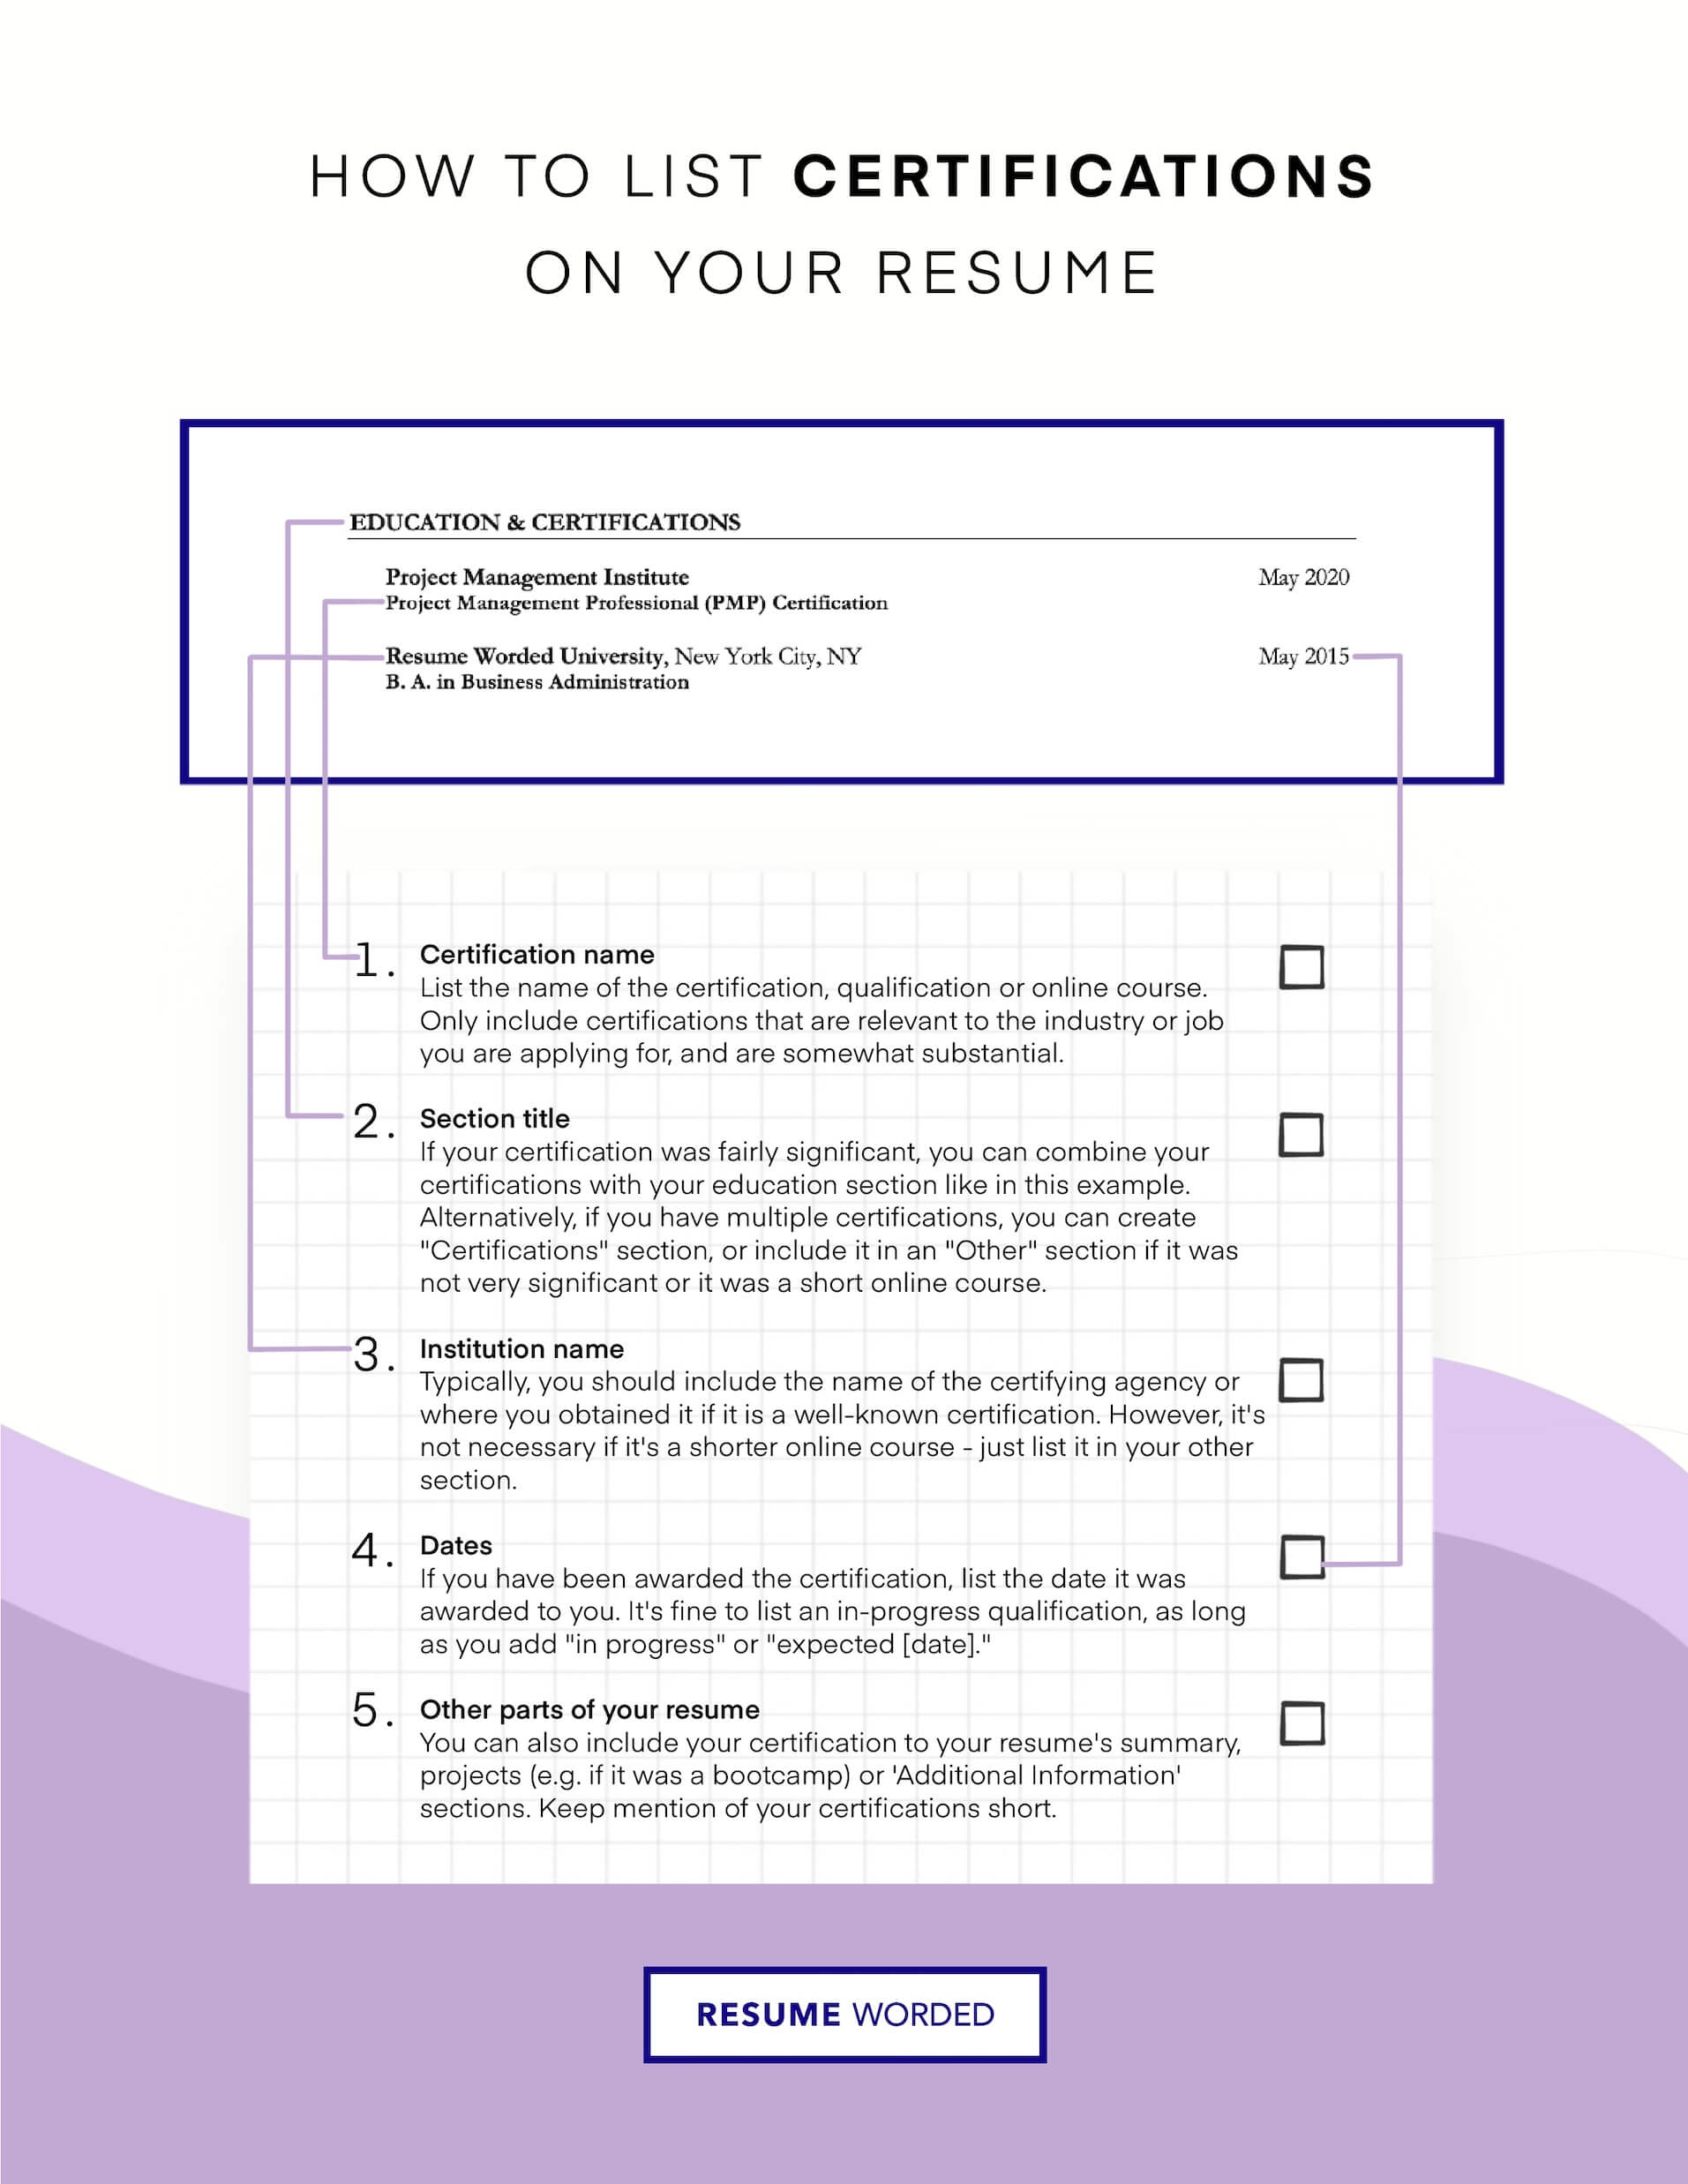 Include Certifications and Continuous Learning - Entry-Level Programmer Resume